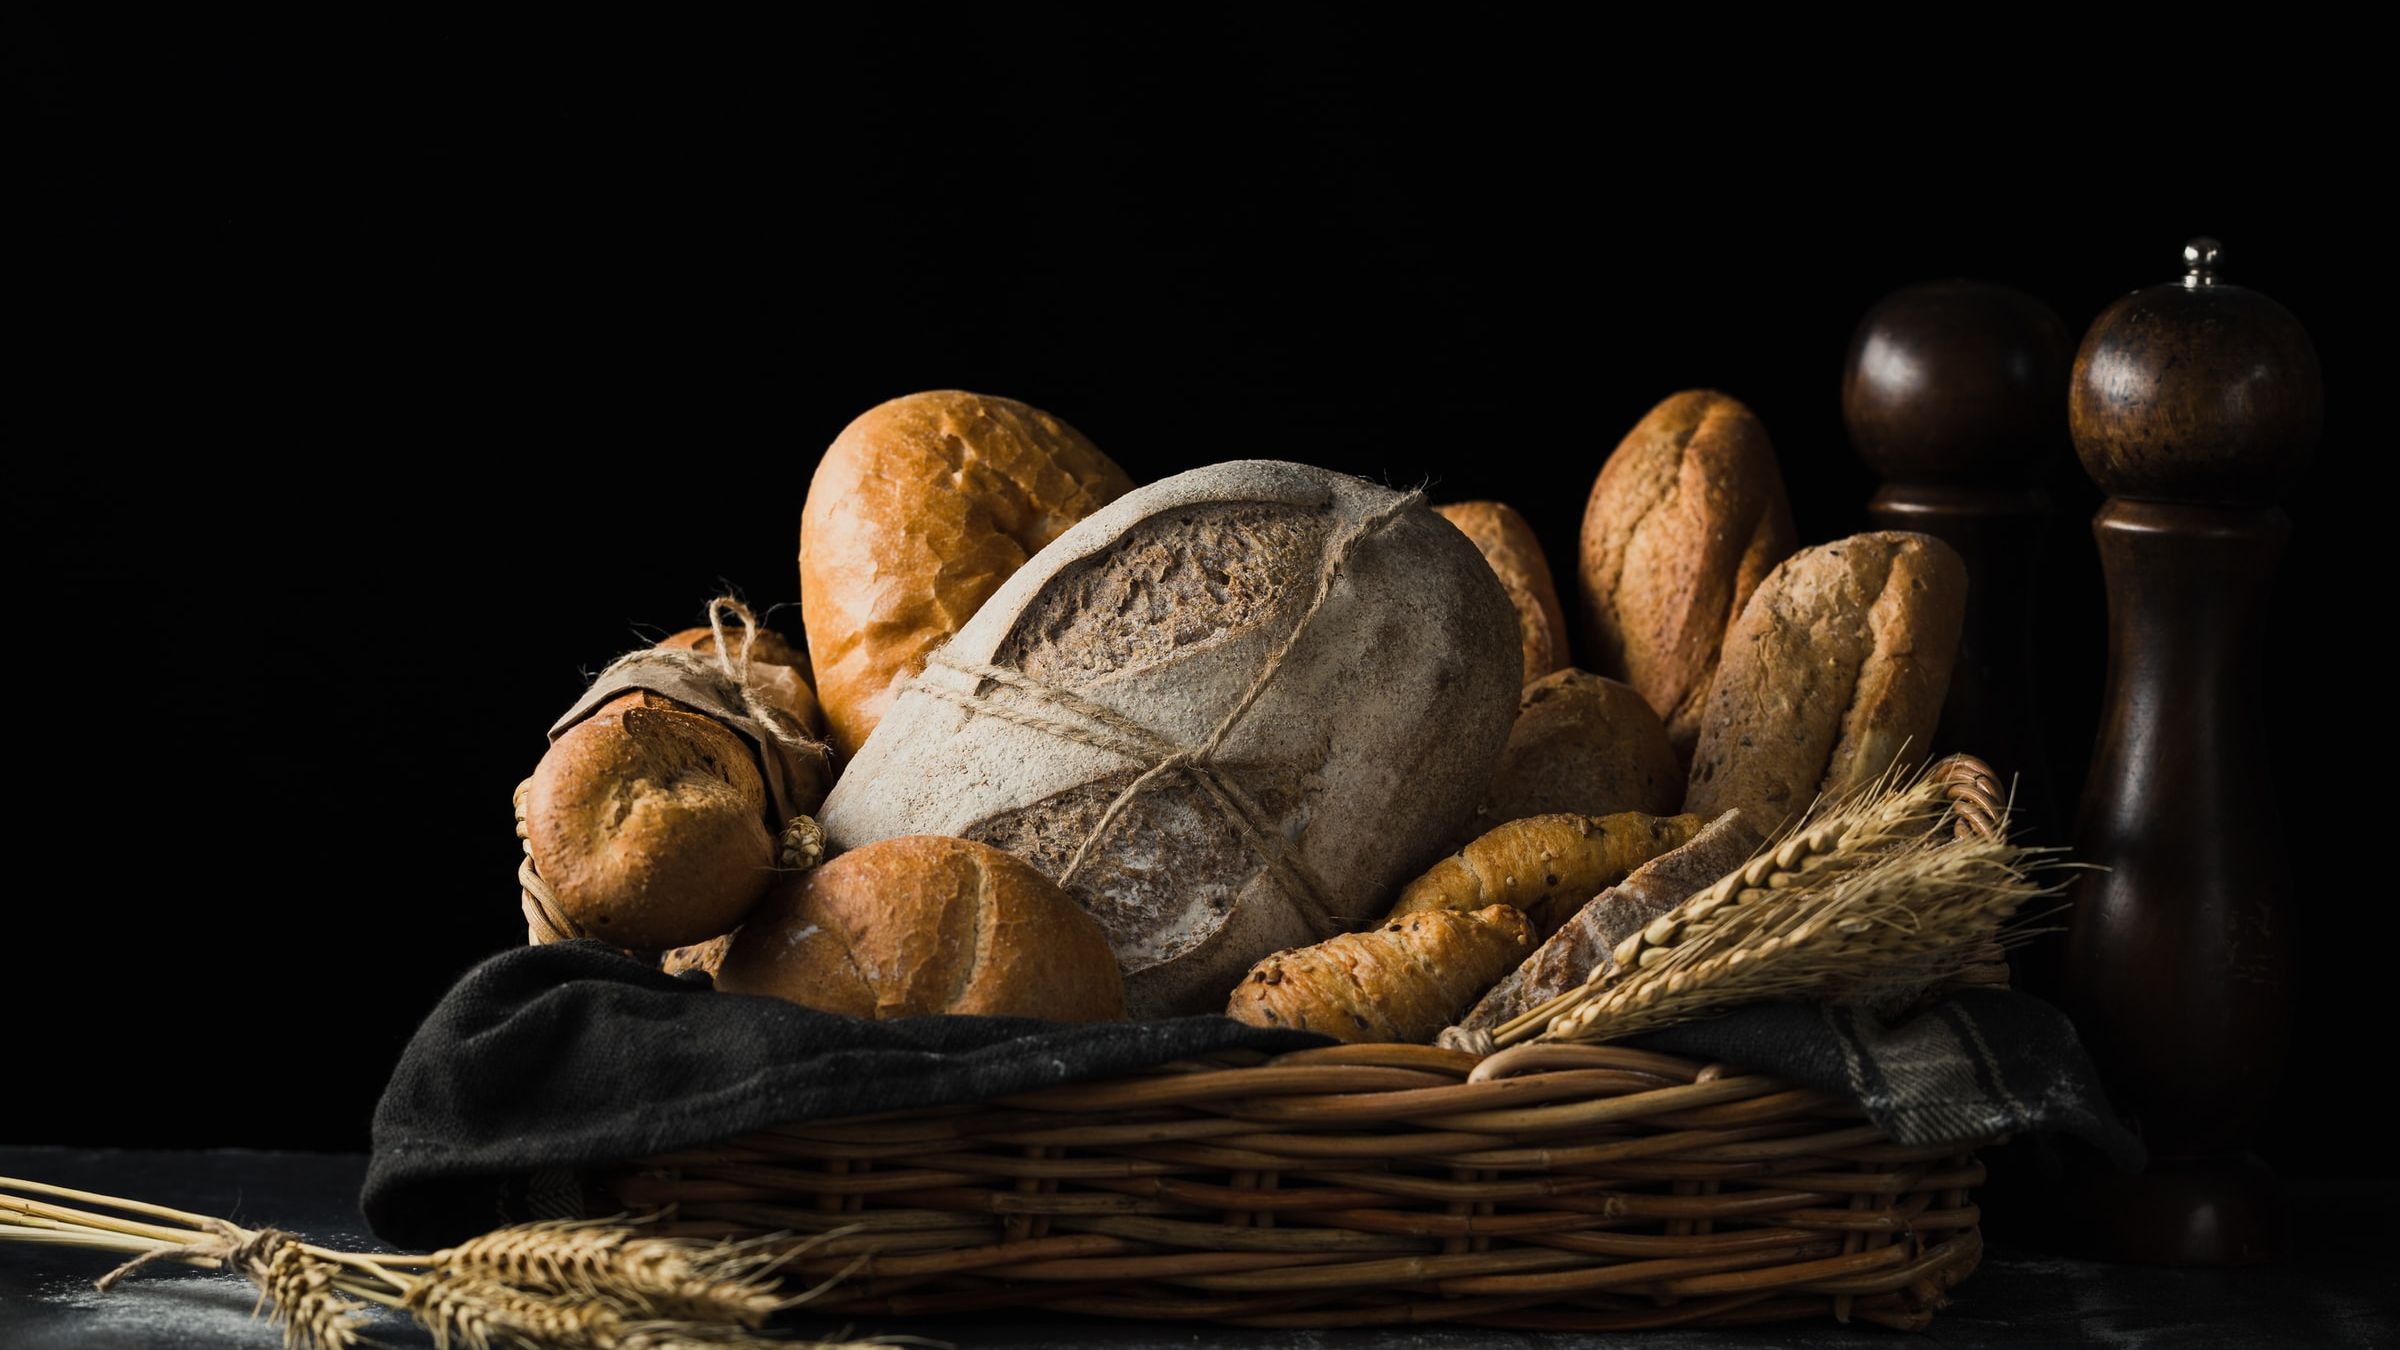 Bread in a basket on a table with dimmed background